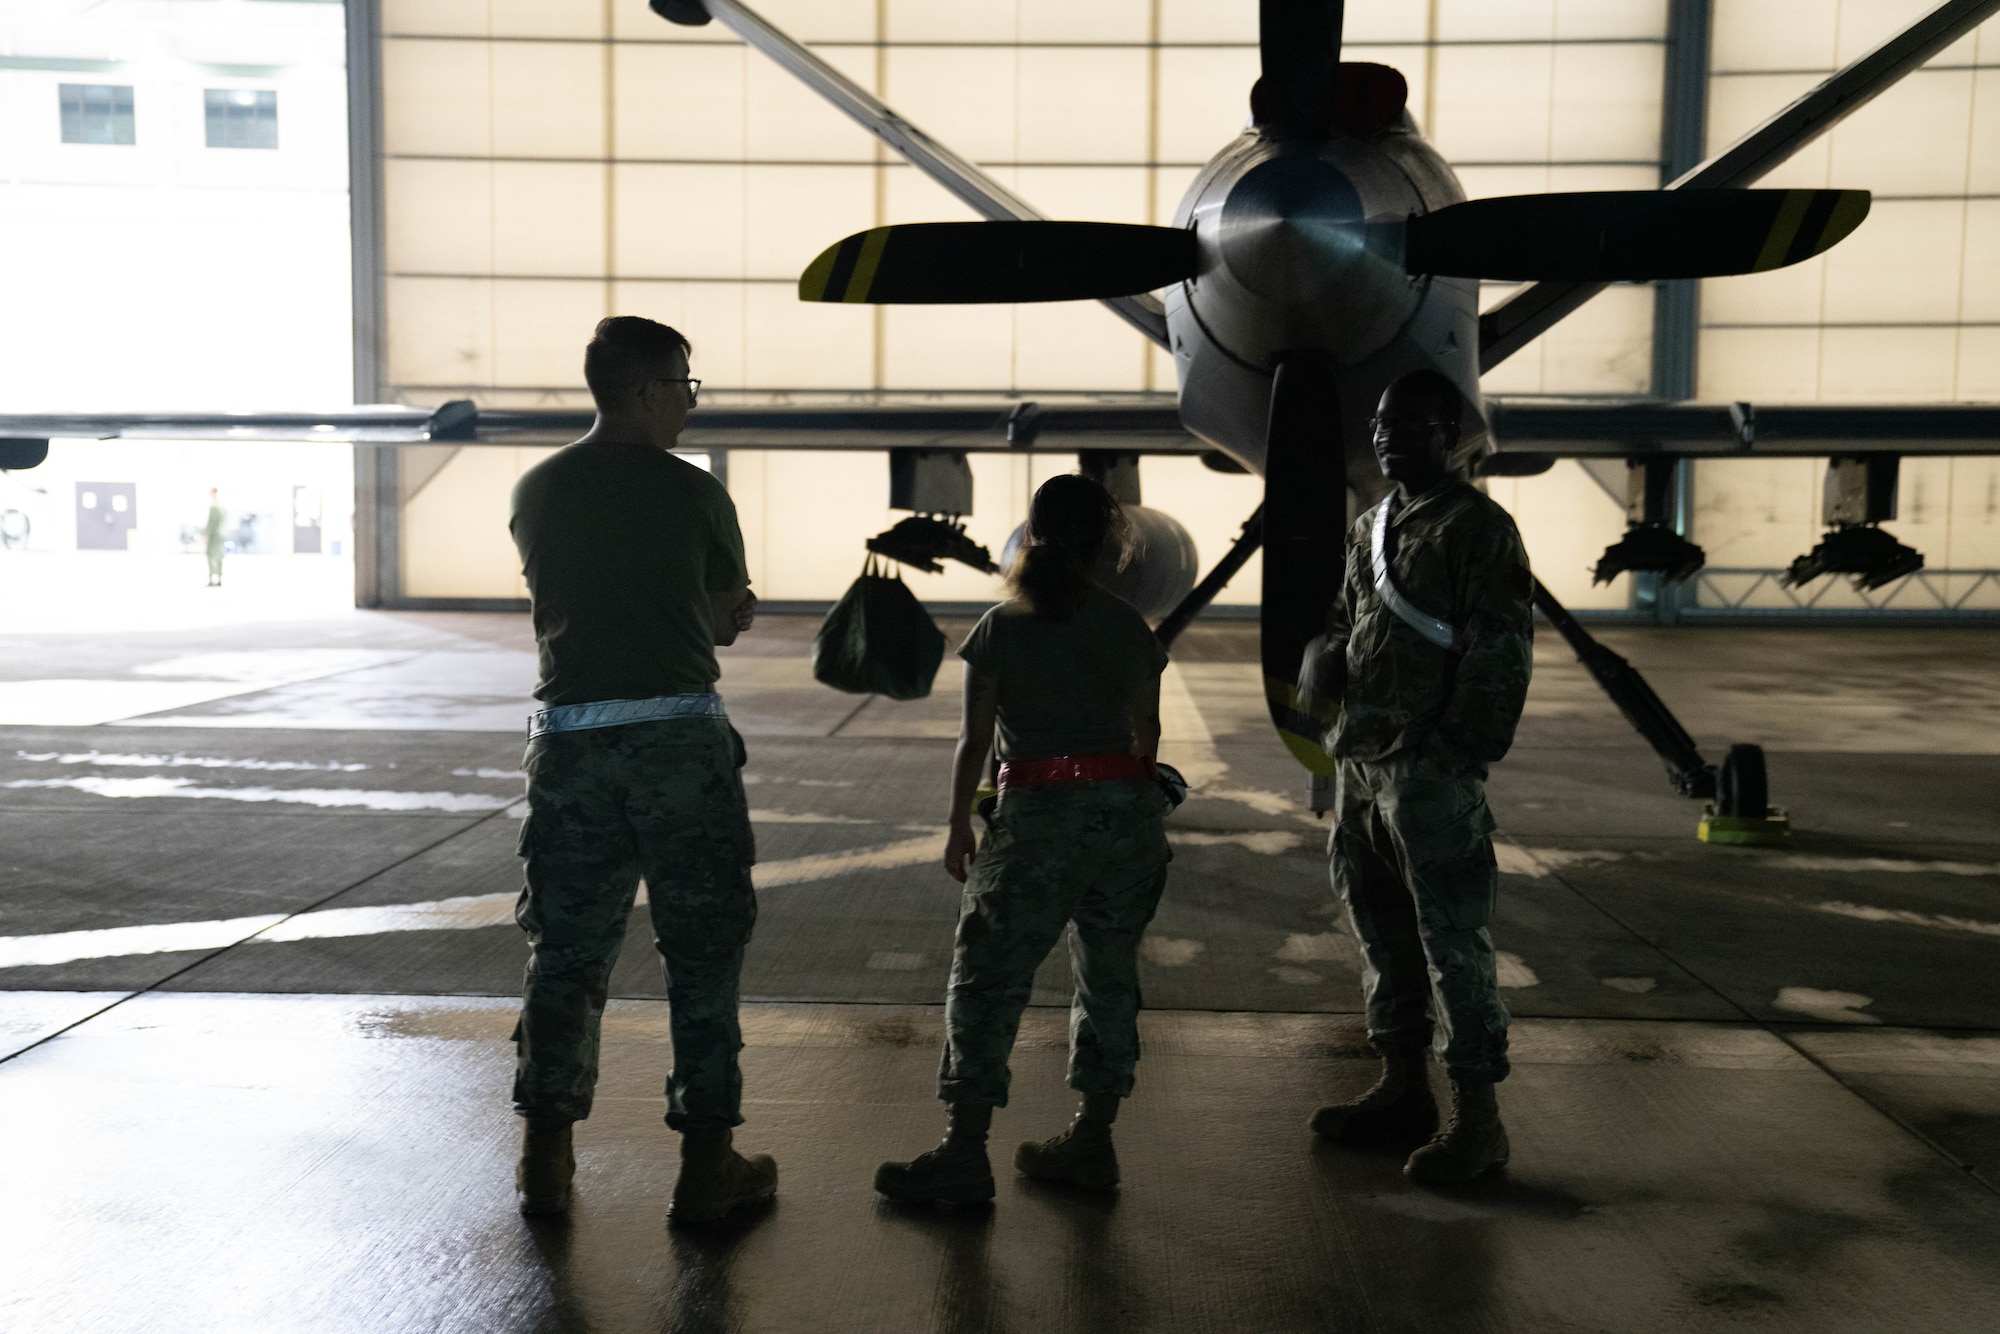 MARINE CORPS BASE HAWAII, Hawaii (July 13, 2022) - U.S. Air Force maintenance specialists, assigned to the 29th Air Maintenance Unit, survey the MQ-9A Reaper at Marine Corps Air Station Kaneohe Bay during Rim of the Pacific (RIMPAC) 2022, July 13. Unmanned and remotely operated vessels extend the capability of interconnected manned platform sensors to enhance the warfighting capacity of multinational joint task forces. Twenty-six nations, 38 ships, four submarines, more than 170 aircraft and 25,000 personnel are participating in RIMPAC from June 29 to Aug. 4 in and around the Hawaiian Islands and Southern California. The world's largest international maritime exercise, RIMPAC provides a unique training opportunity while fostering and sustaining cooperative relationships among participants critical to ensuring the safety of sea lanes and security on the world's oceans. RIMPAC 2022 is the 28th exercise in the series that began in 1971. (U.S. Air Force photo by Airman 1st Class Ariel O'Shea)